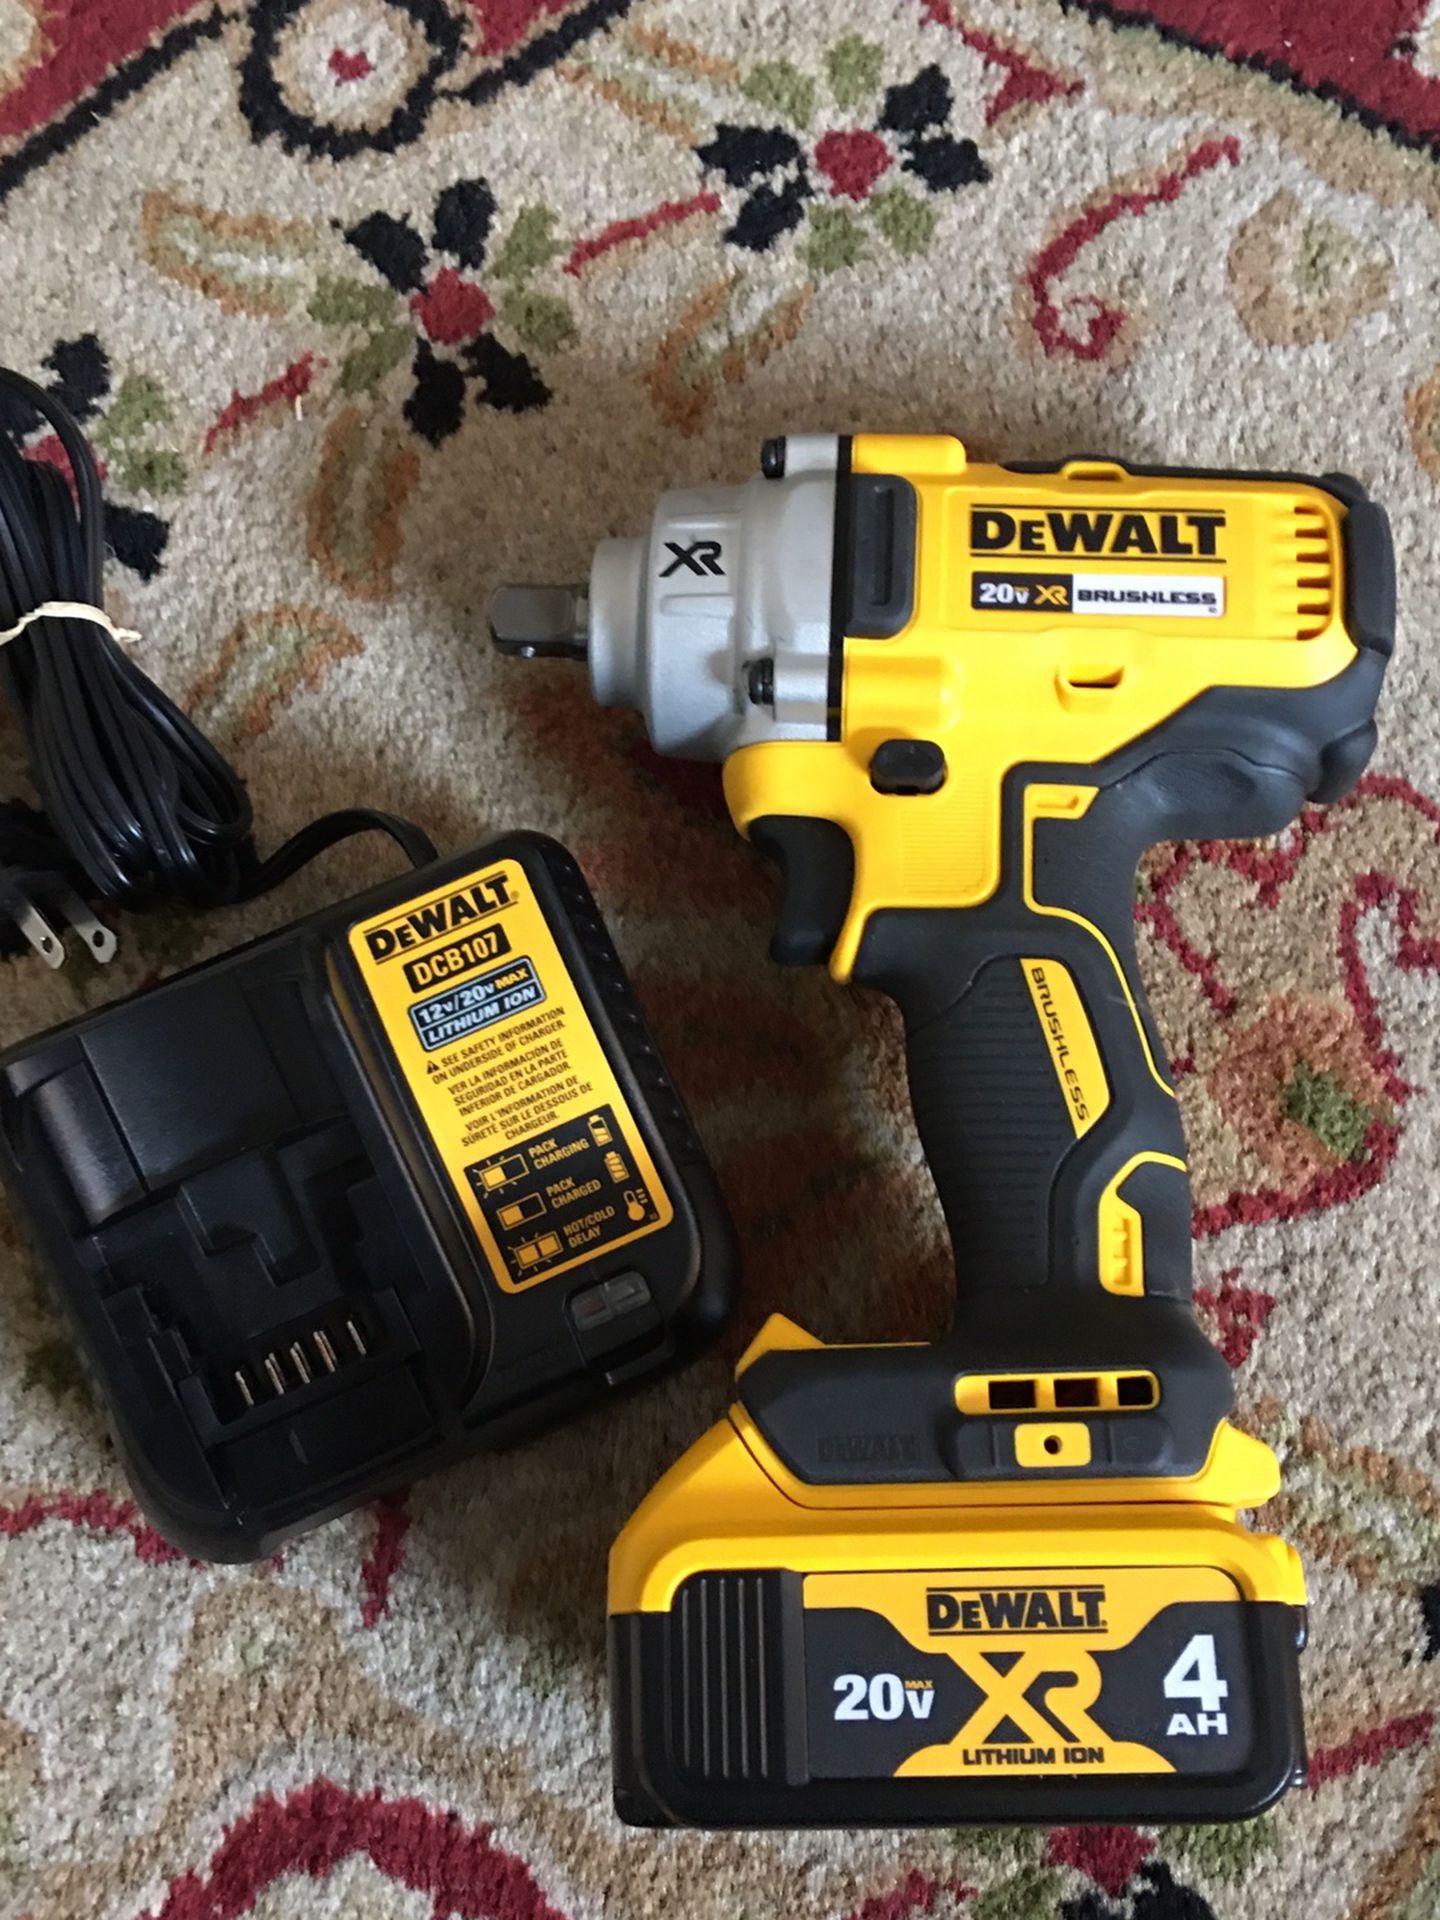 DEWALT 20V XR Brushless 1/2 inch Mid Torque Impact Wrench With Battery and Charger